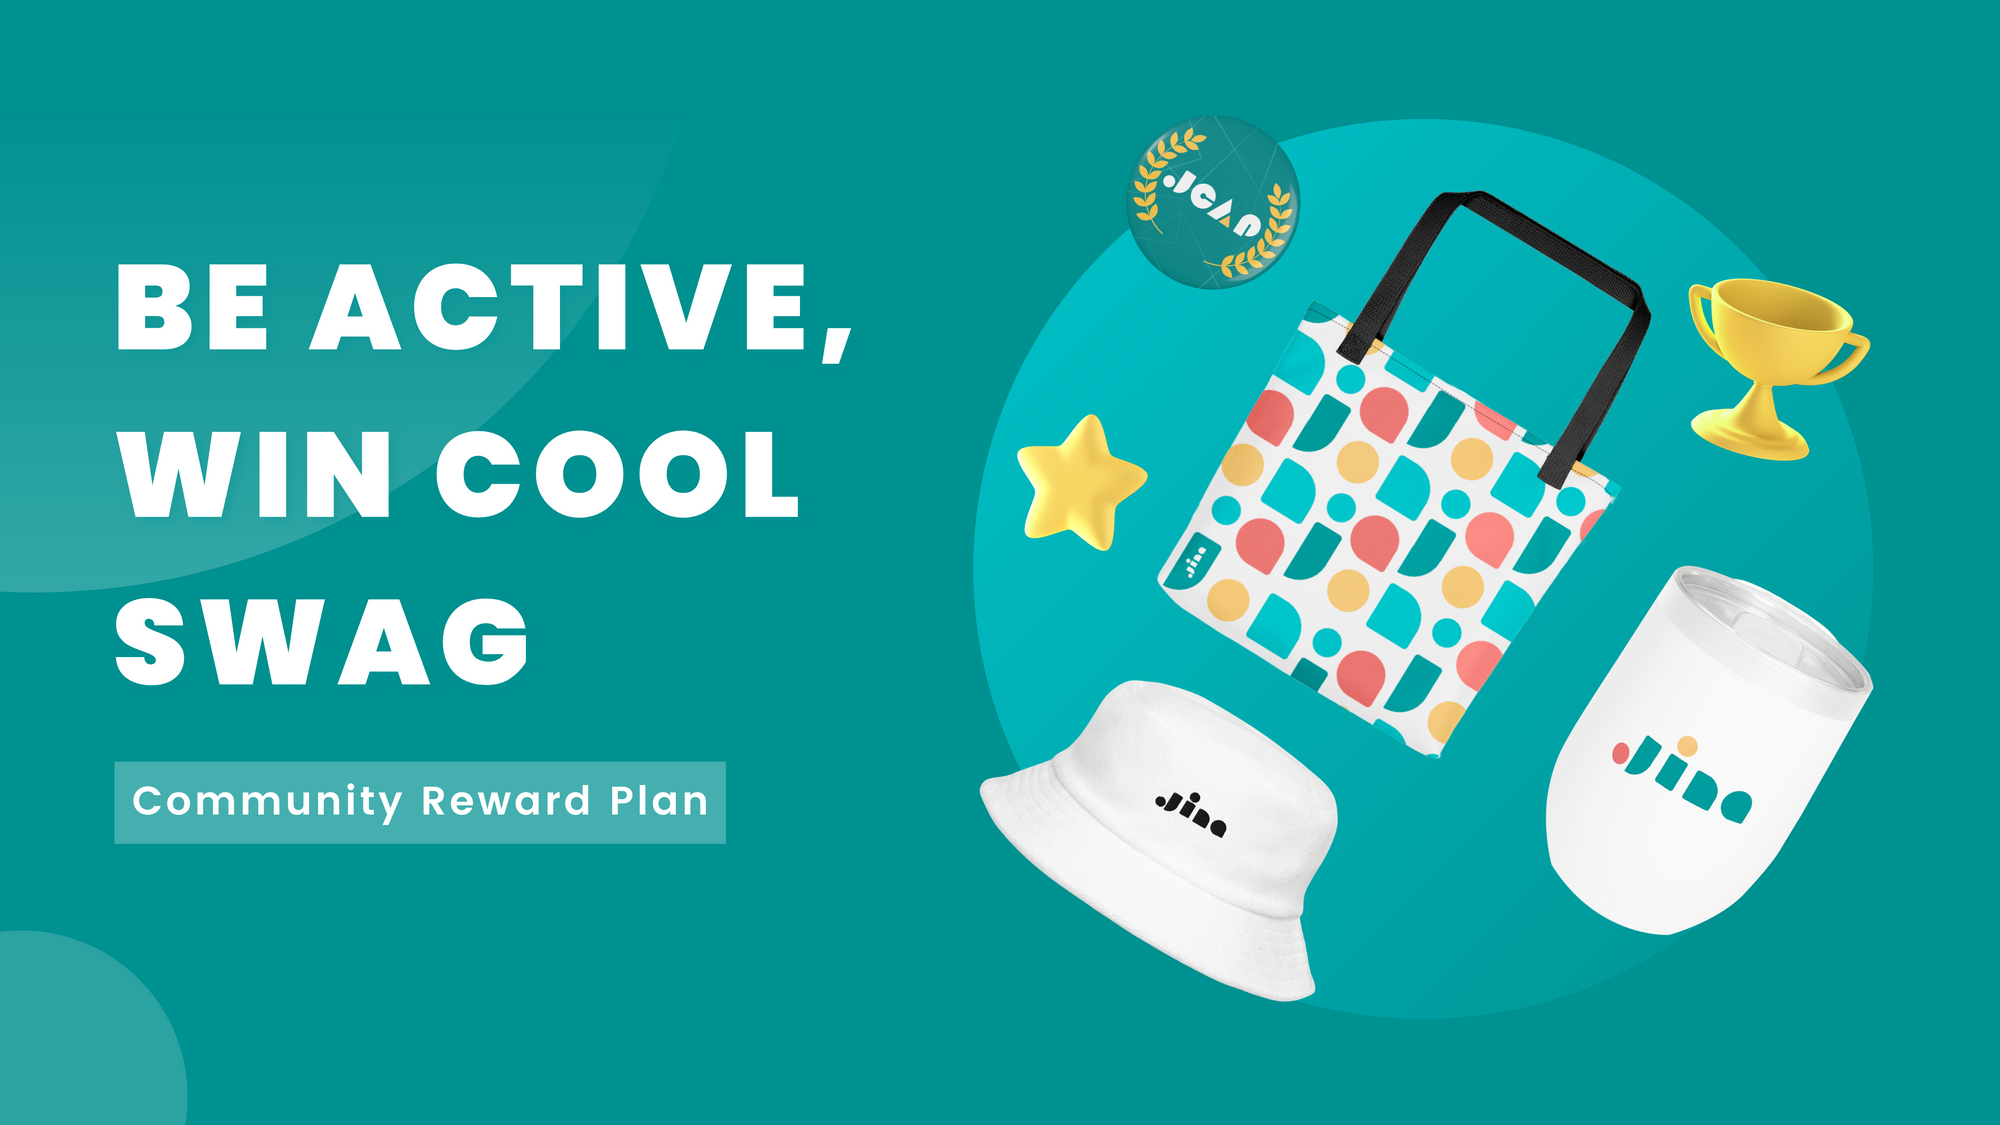 Promotional turquoise graphic with "Be Active, Win Cool Swag" text, a "Community Reward Plan" button, and items including a b